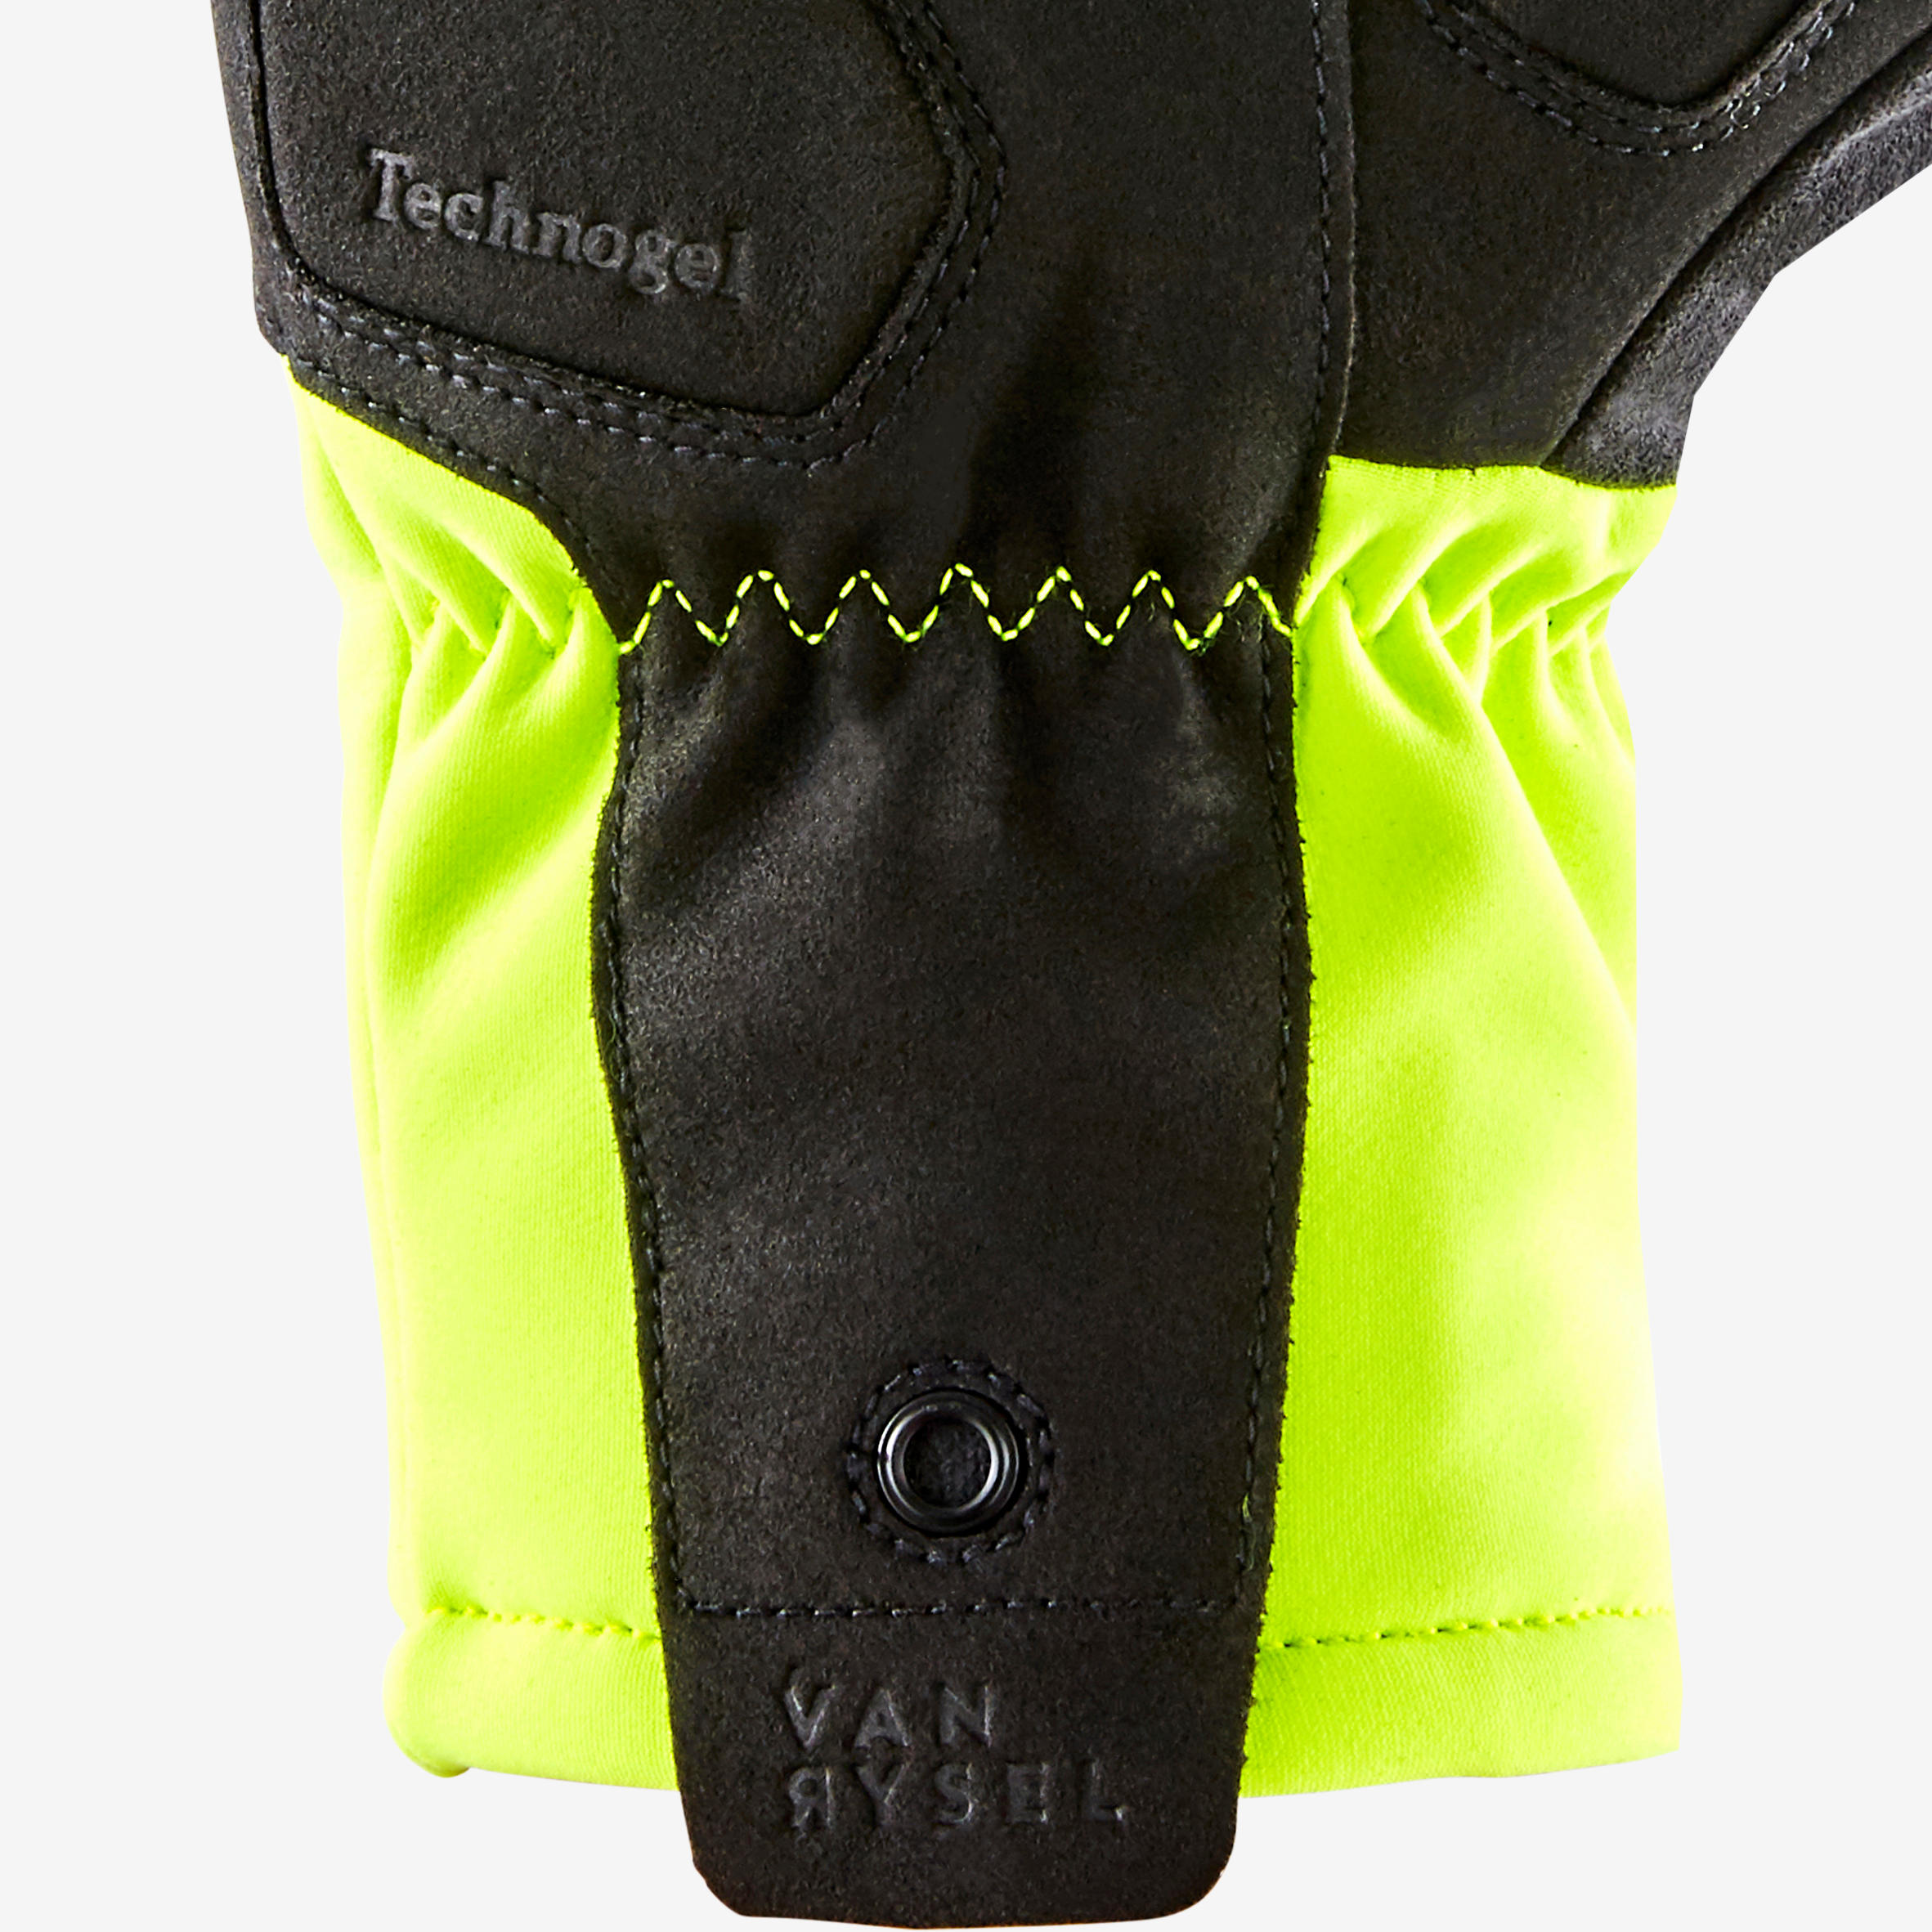 RR 900 Thermal Cycling Gloves - Yellow 9/9